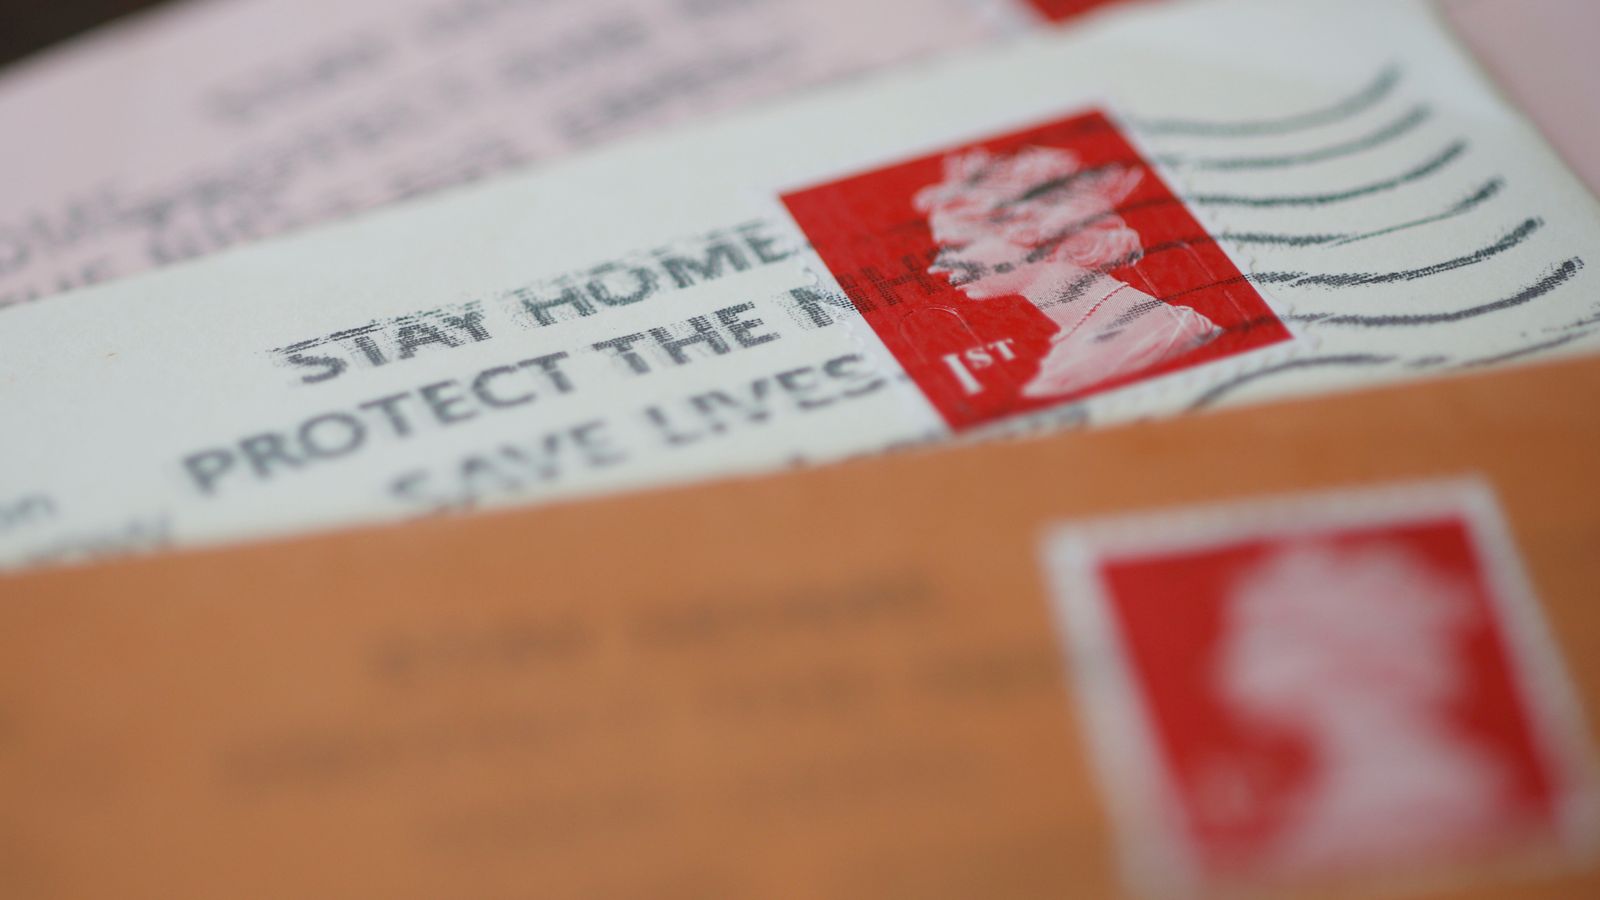 Price Of First And Second Class Stamps To Rise In April | Uk News | Sky News